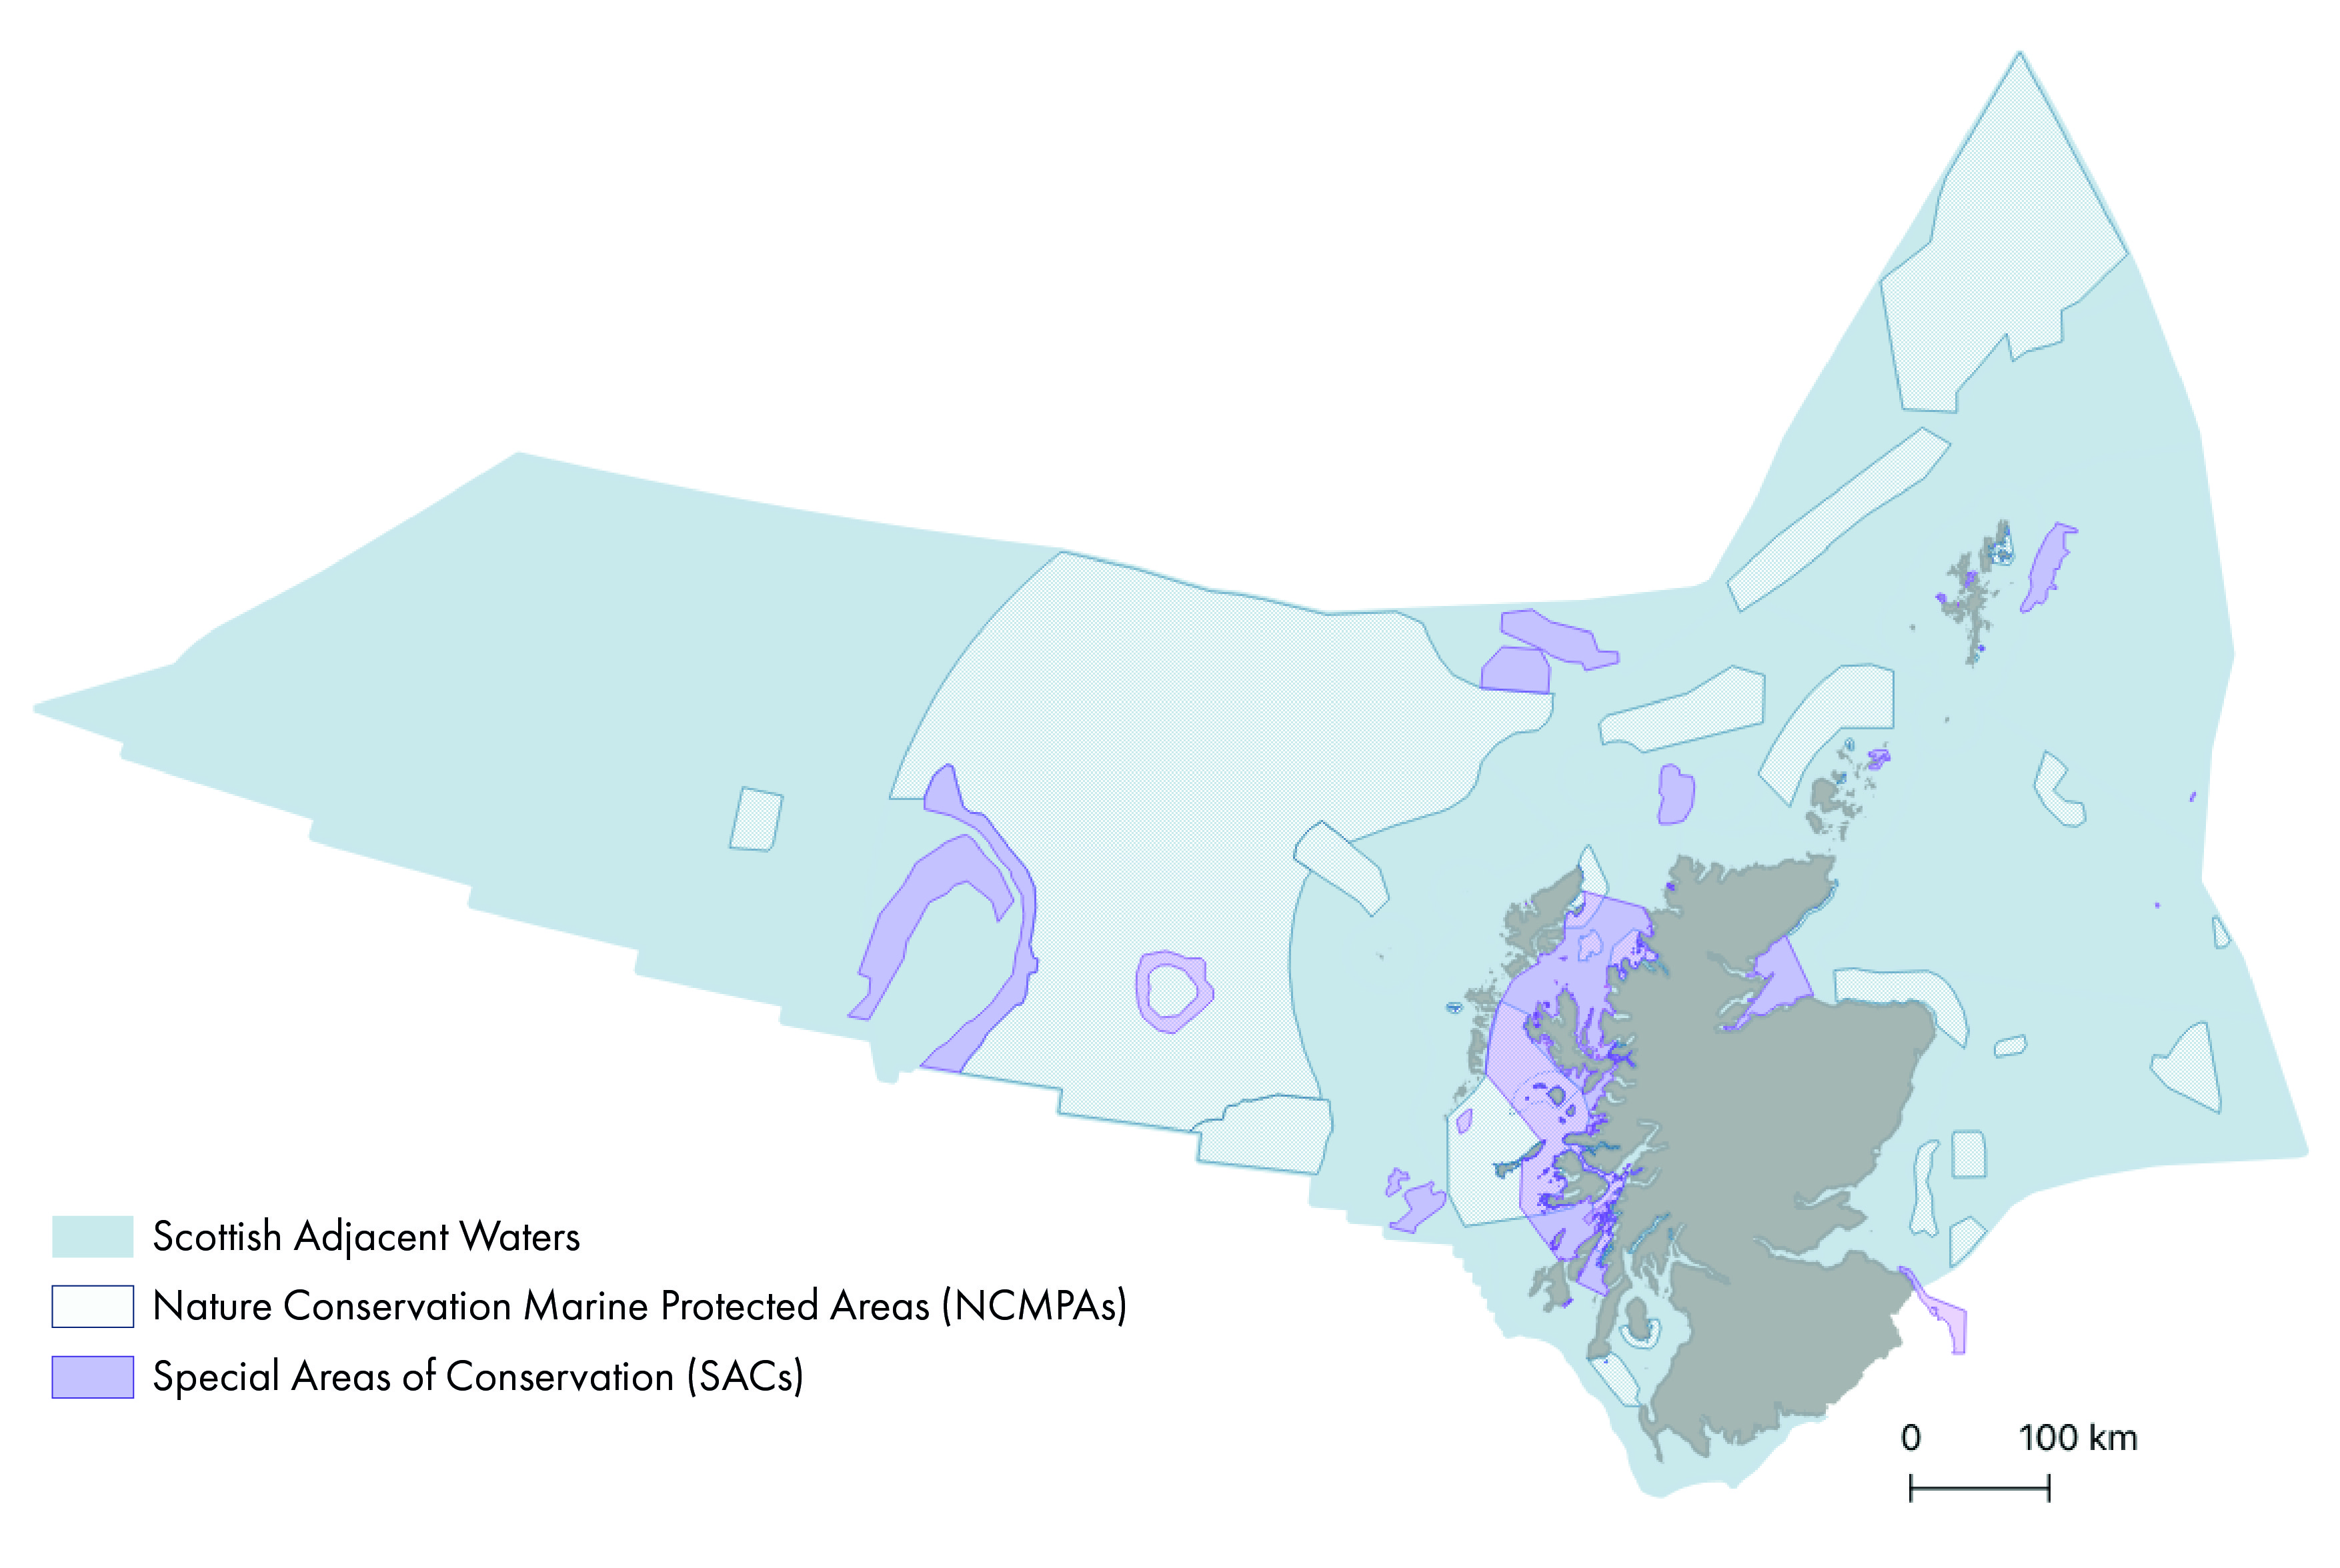 Map of Scottish Adjacent waters showing regions designated as Nature Conservation Marine Protected Areas and Special Areas of Conservation (SACs).